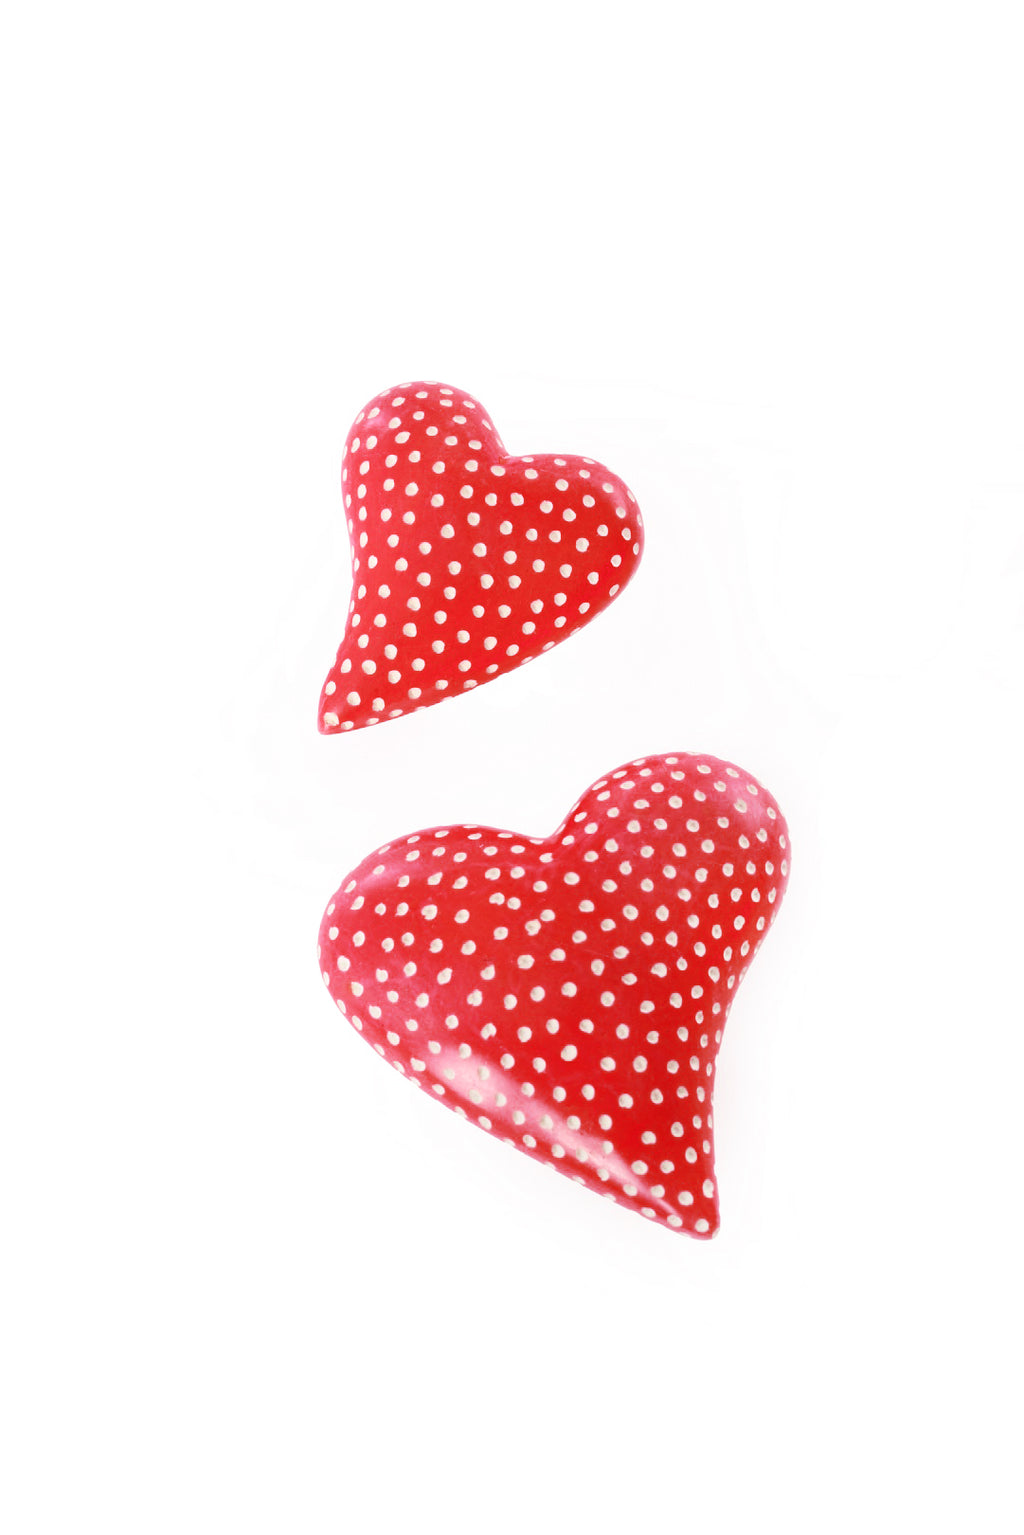 Set of Two Chubby Off-Beat Red Hearts